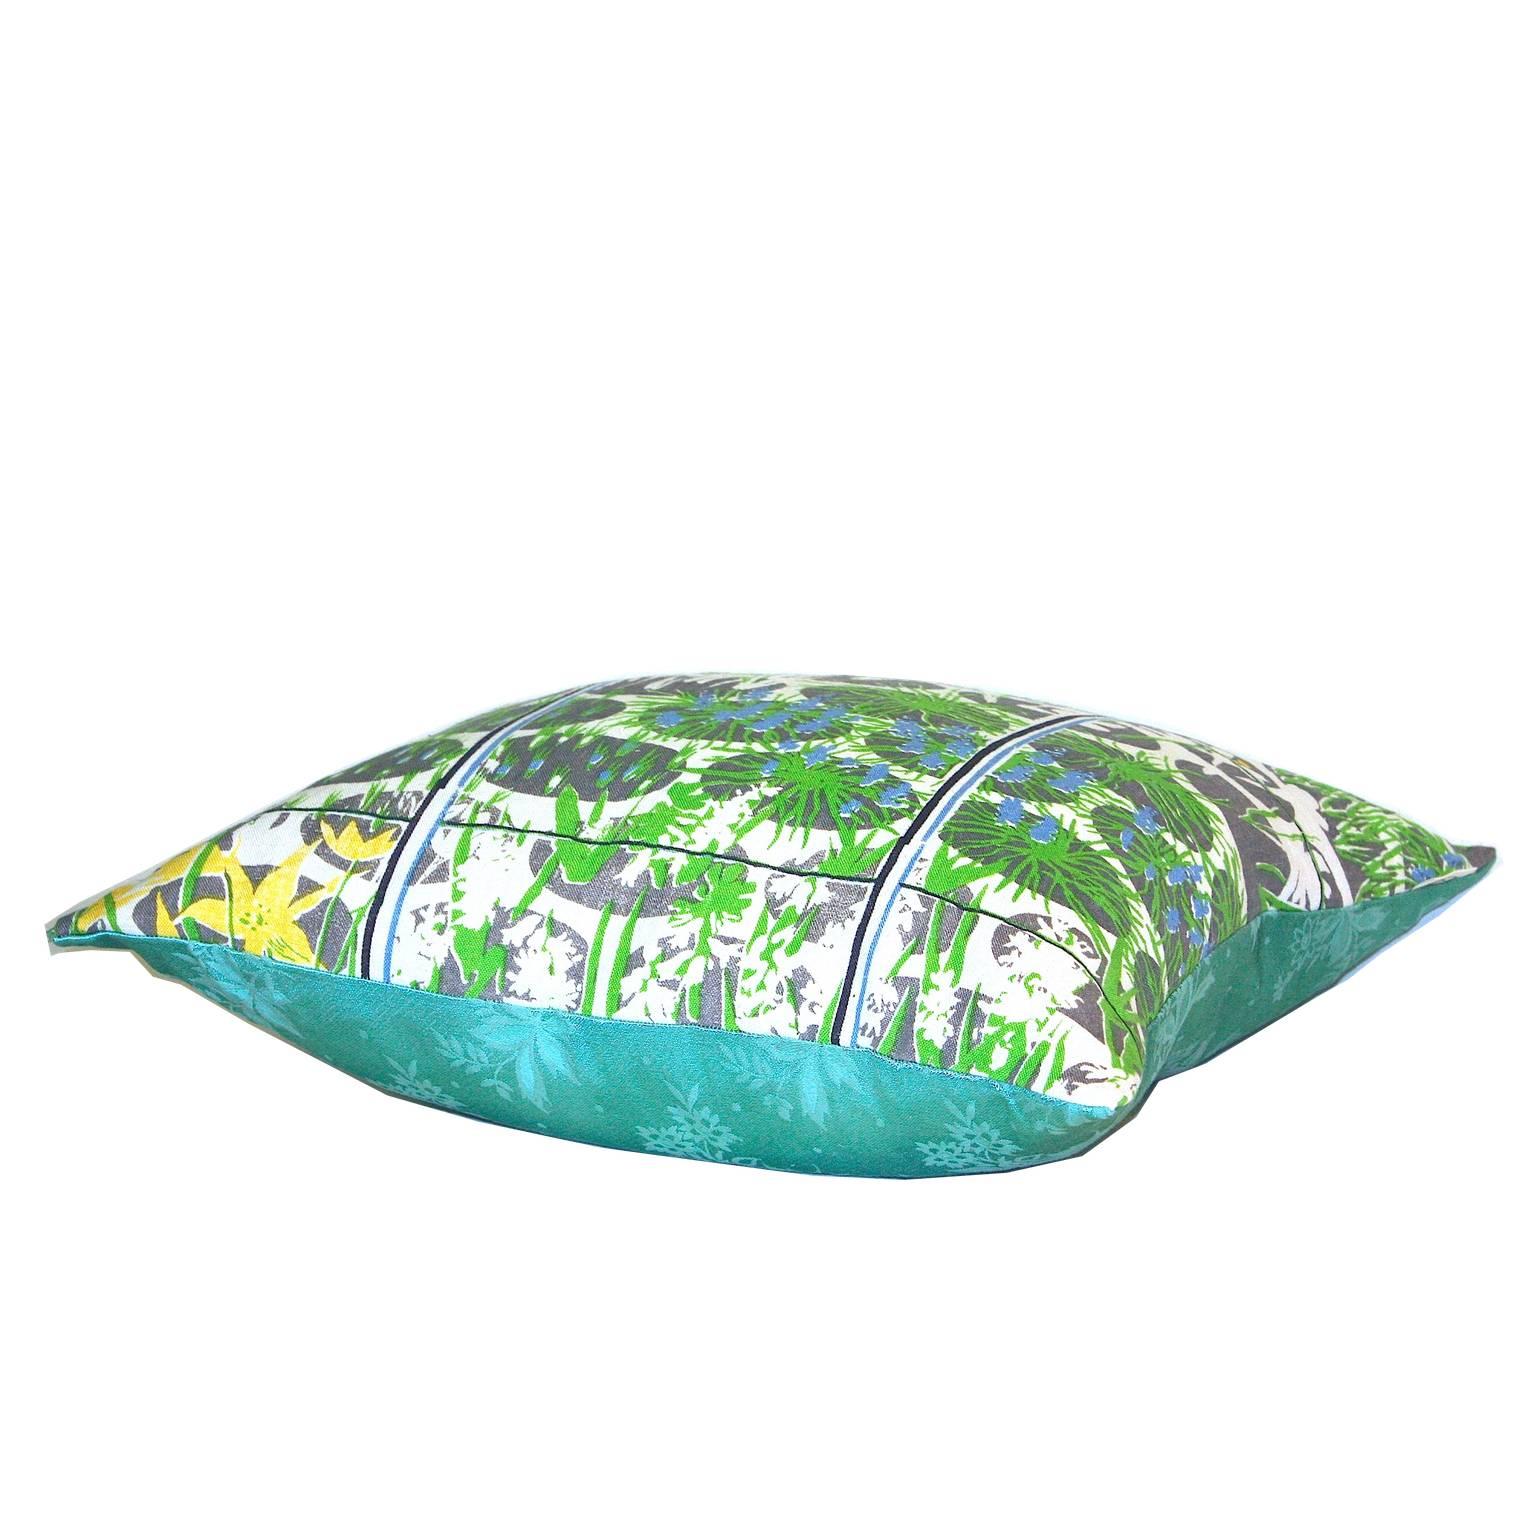 'Candy' is a one-off cushion from the Sunbeam Jackie textile collection made using heritage fabrics; 1950’s screen-printed linen with abstract water lily motif
1950s green floral brocade.
A one-off cushion from Sunbeam Jackie, perfect for adorning